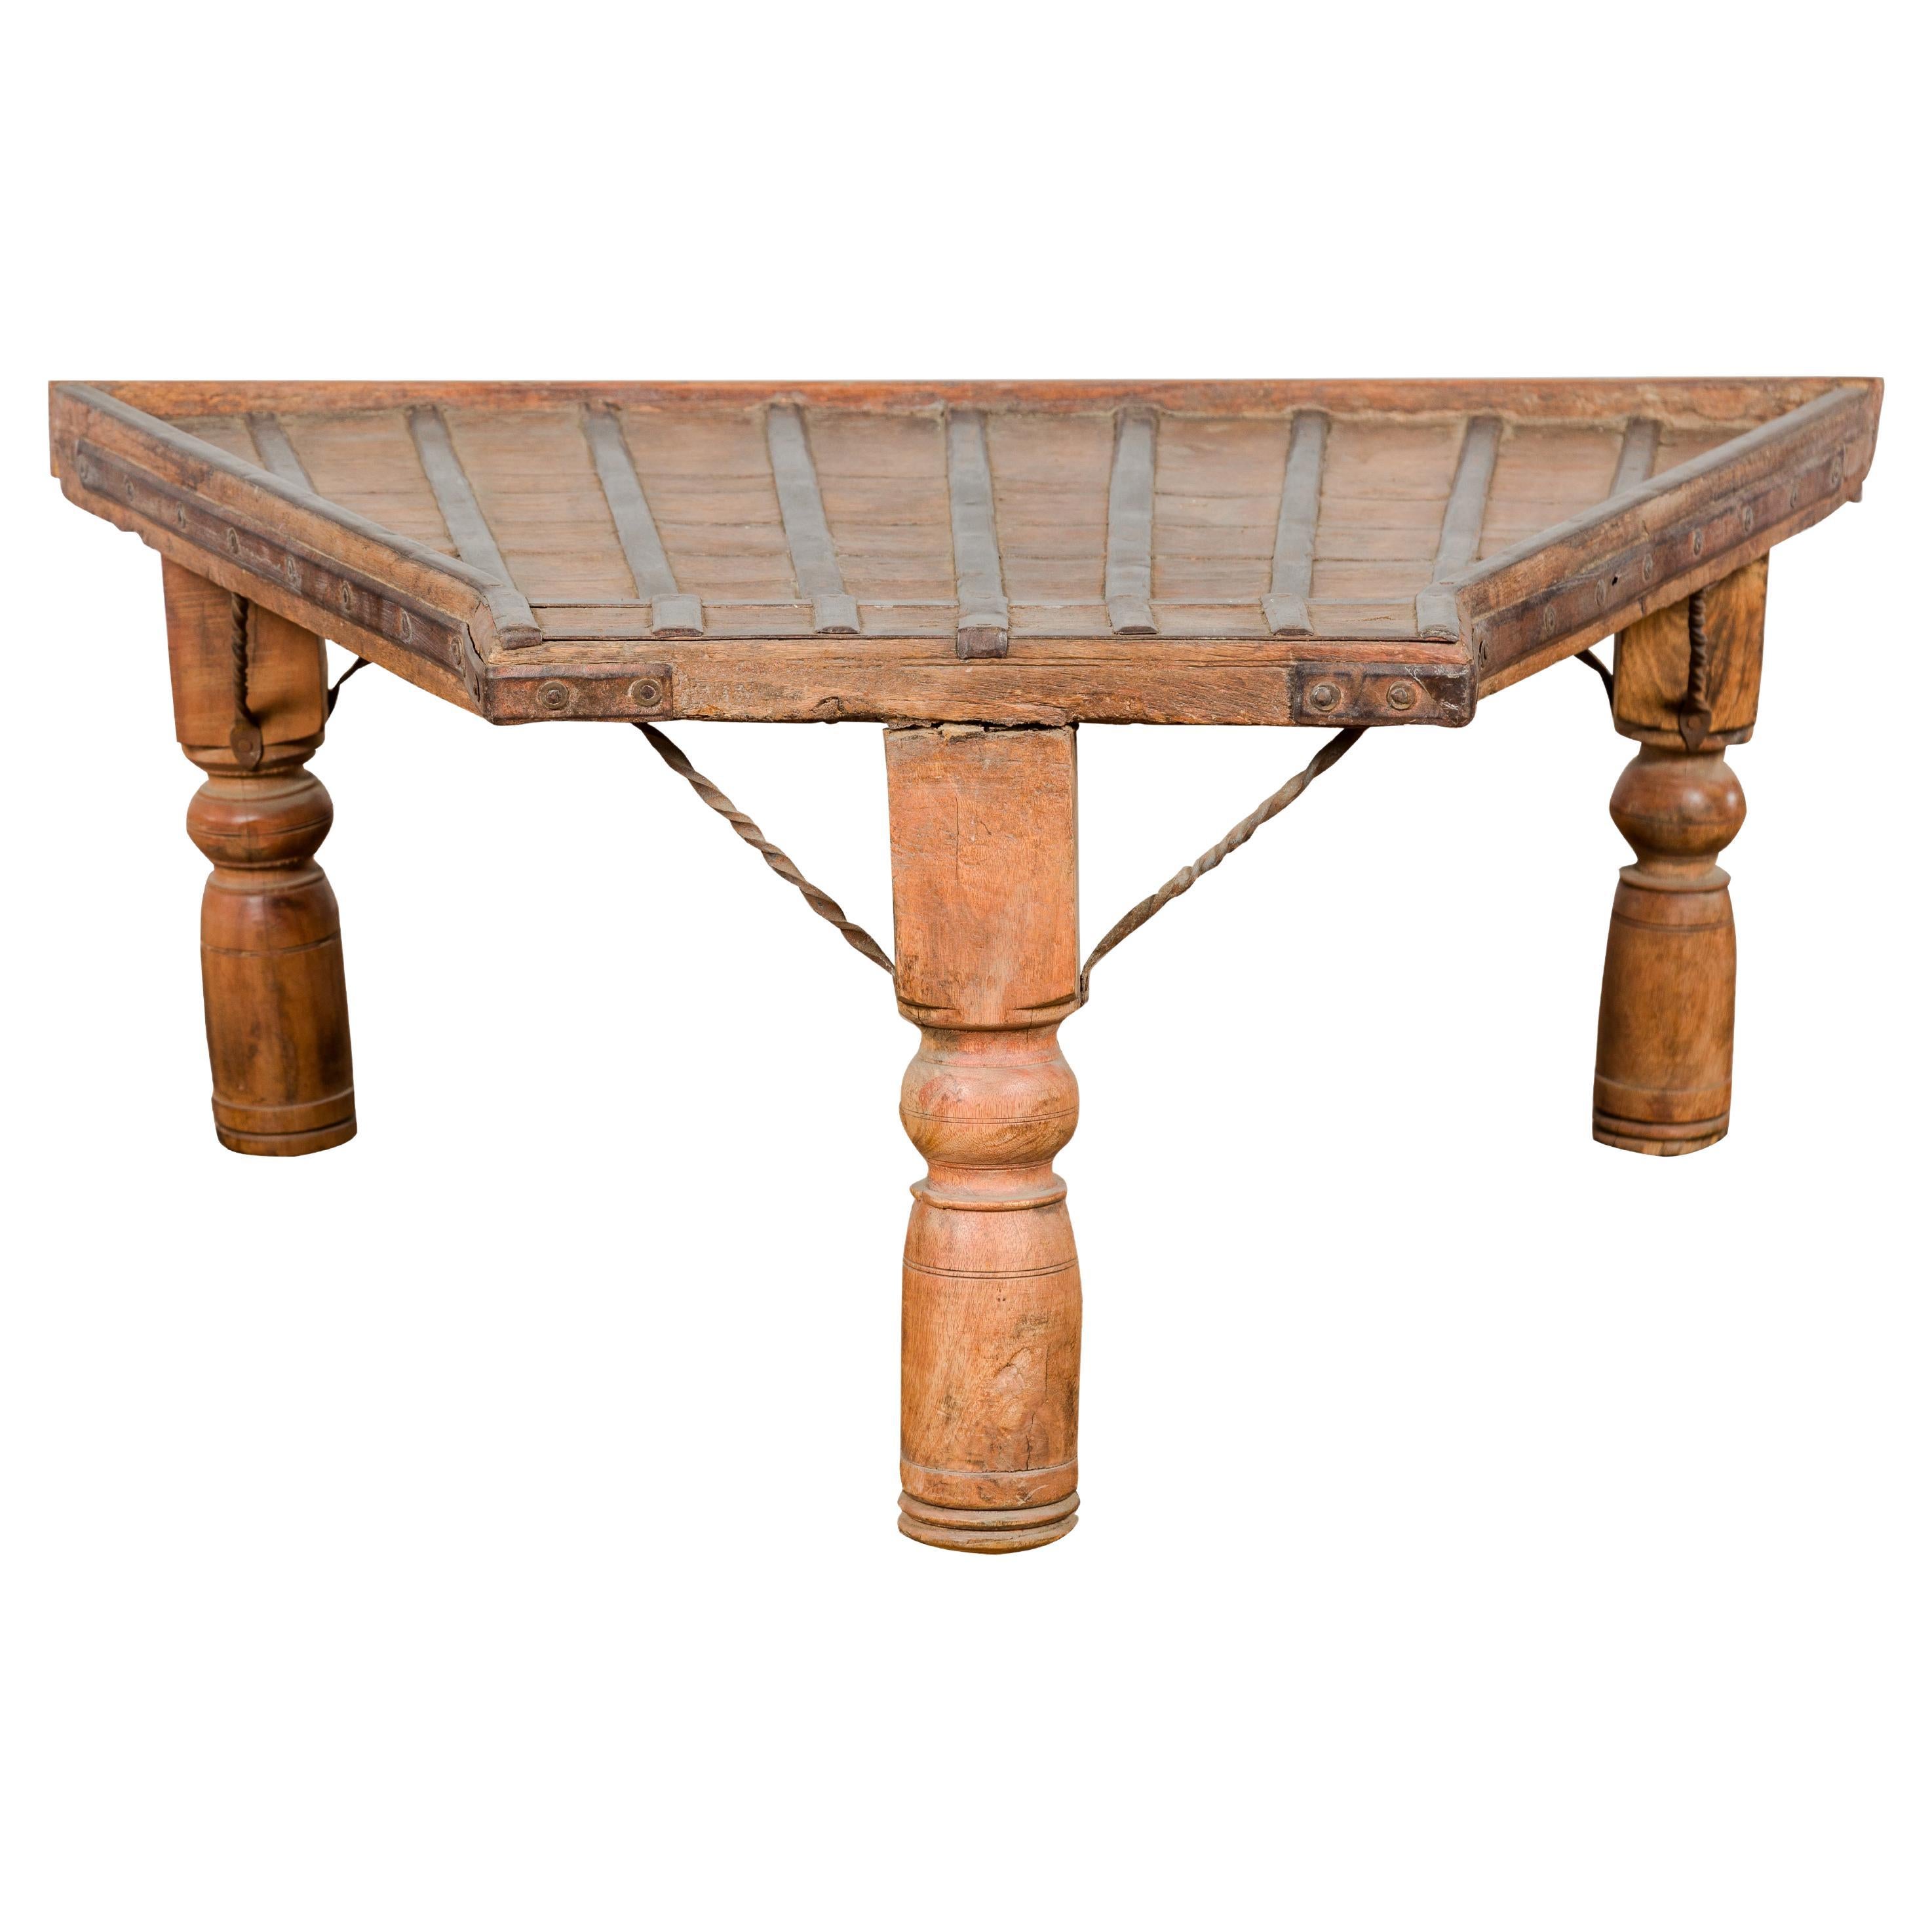 19th Century Bullock Cart Rustic Coffee Table with Twisted Iron Stretchers For Sale